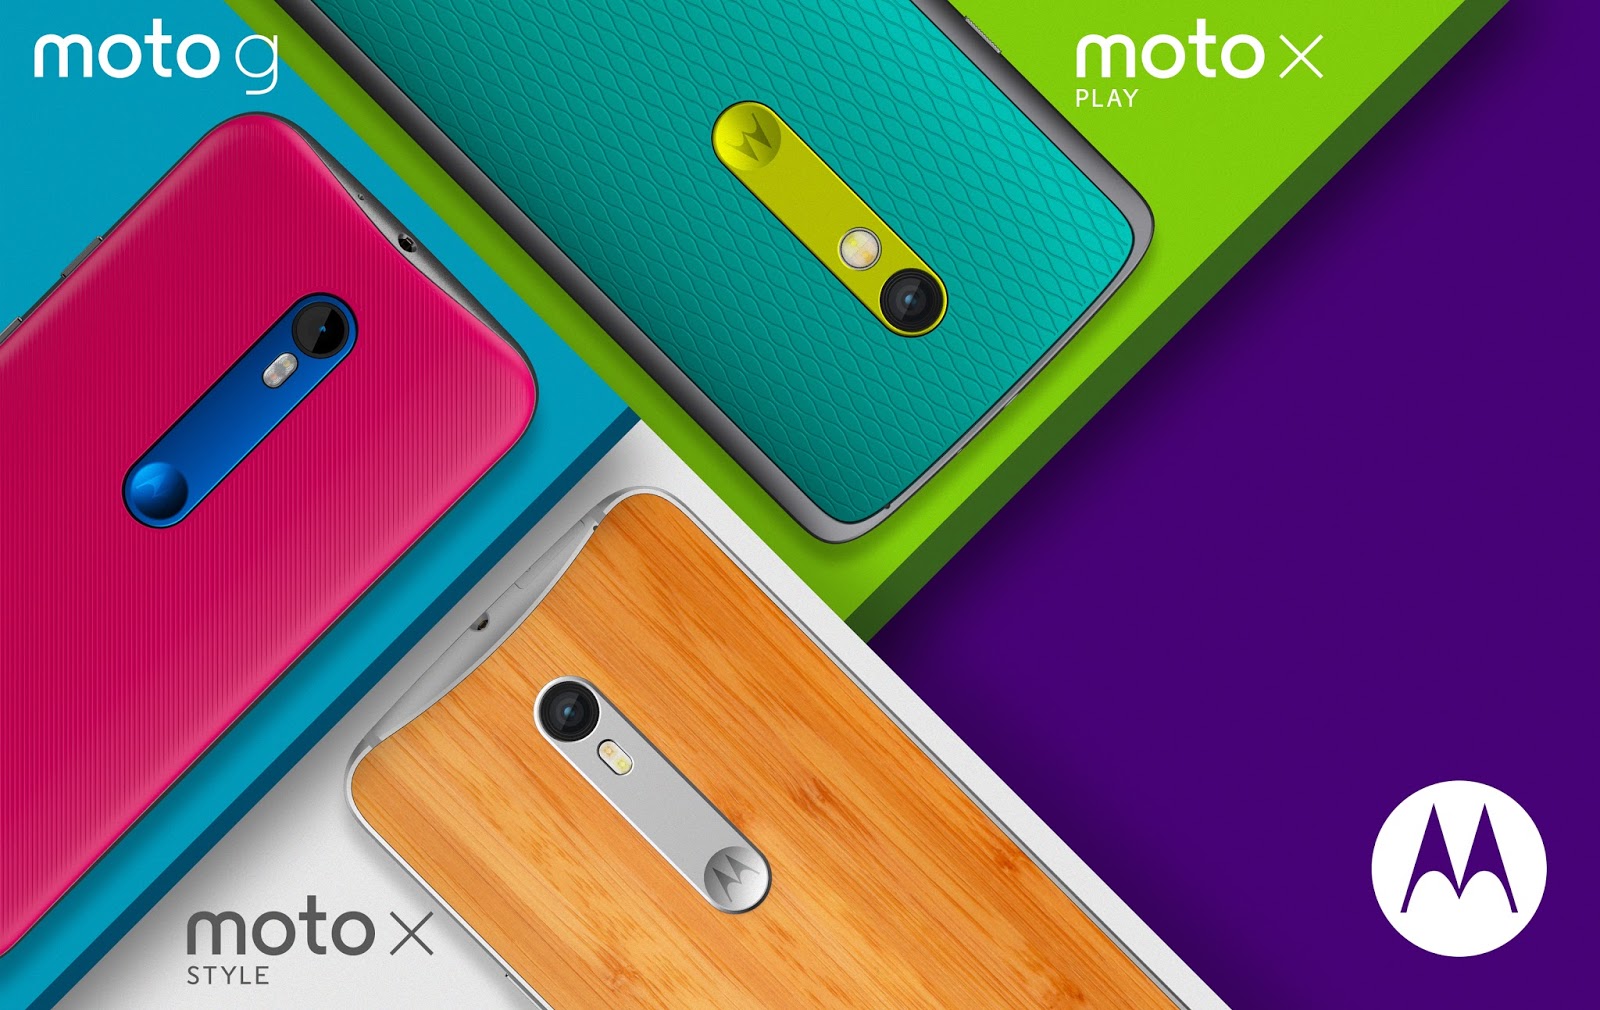 Moto X Style And Moto X Play